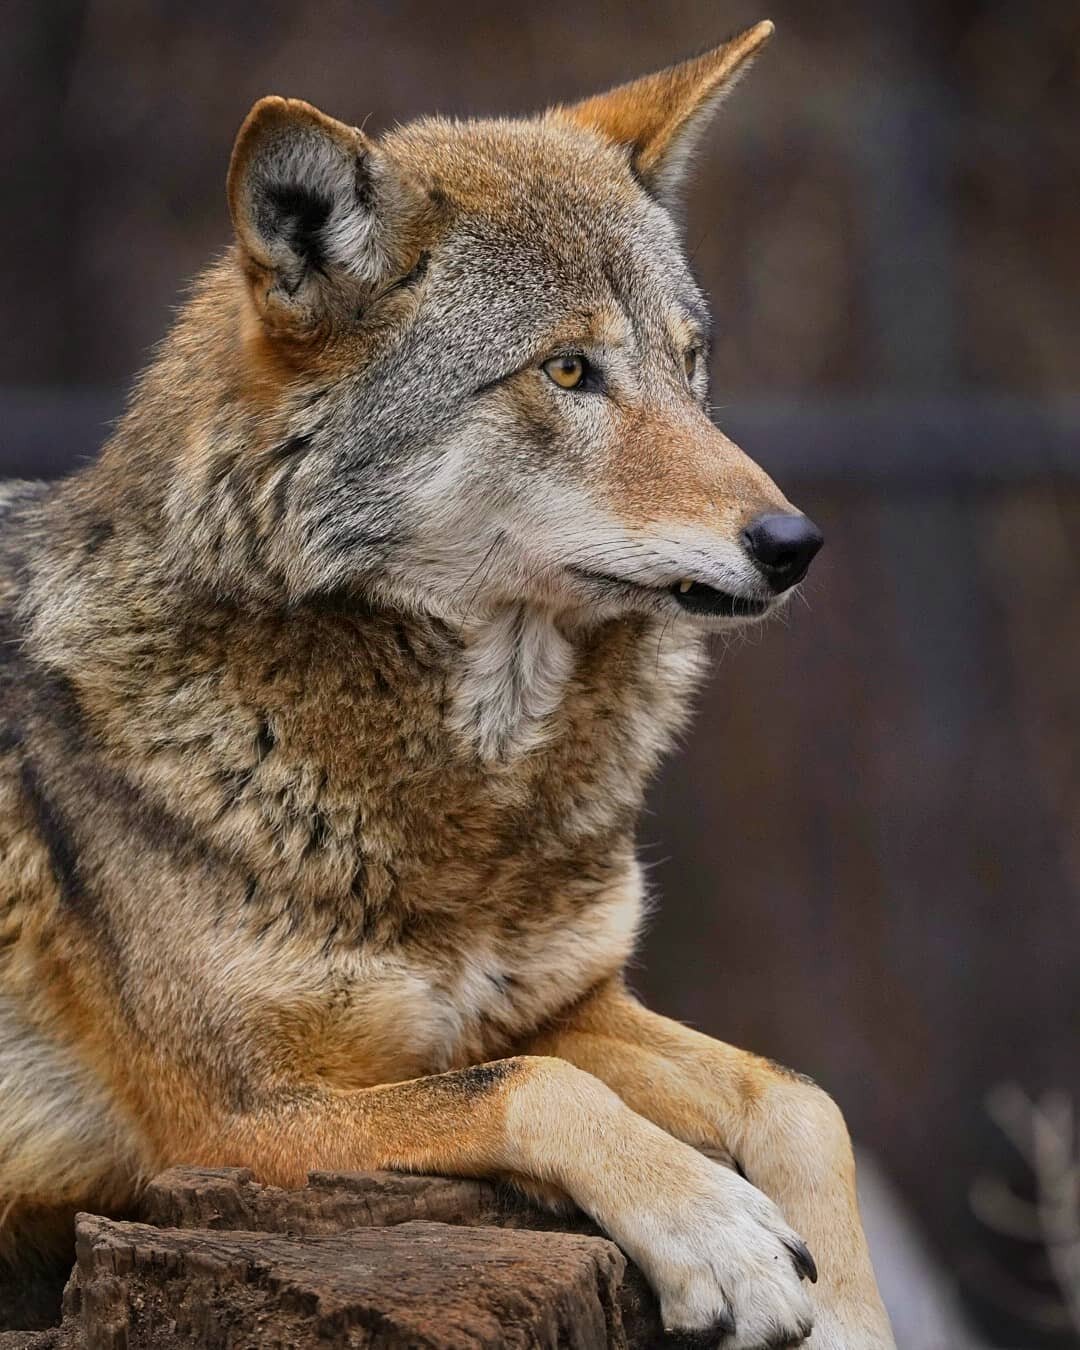 Red wolf
Probably my favorite picture pf the day from our trip to the roger williams zoo its always nice to get in practice with wildlife photography at a zoo.

#rogerwilliamszoo #zoo #wolf #wolfpack #zooanimals #animal #preditor #carnivore #providen